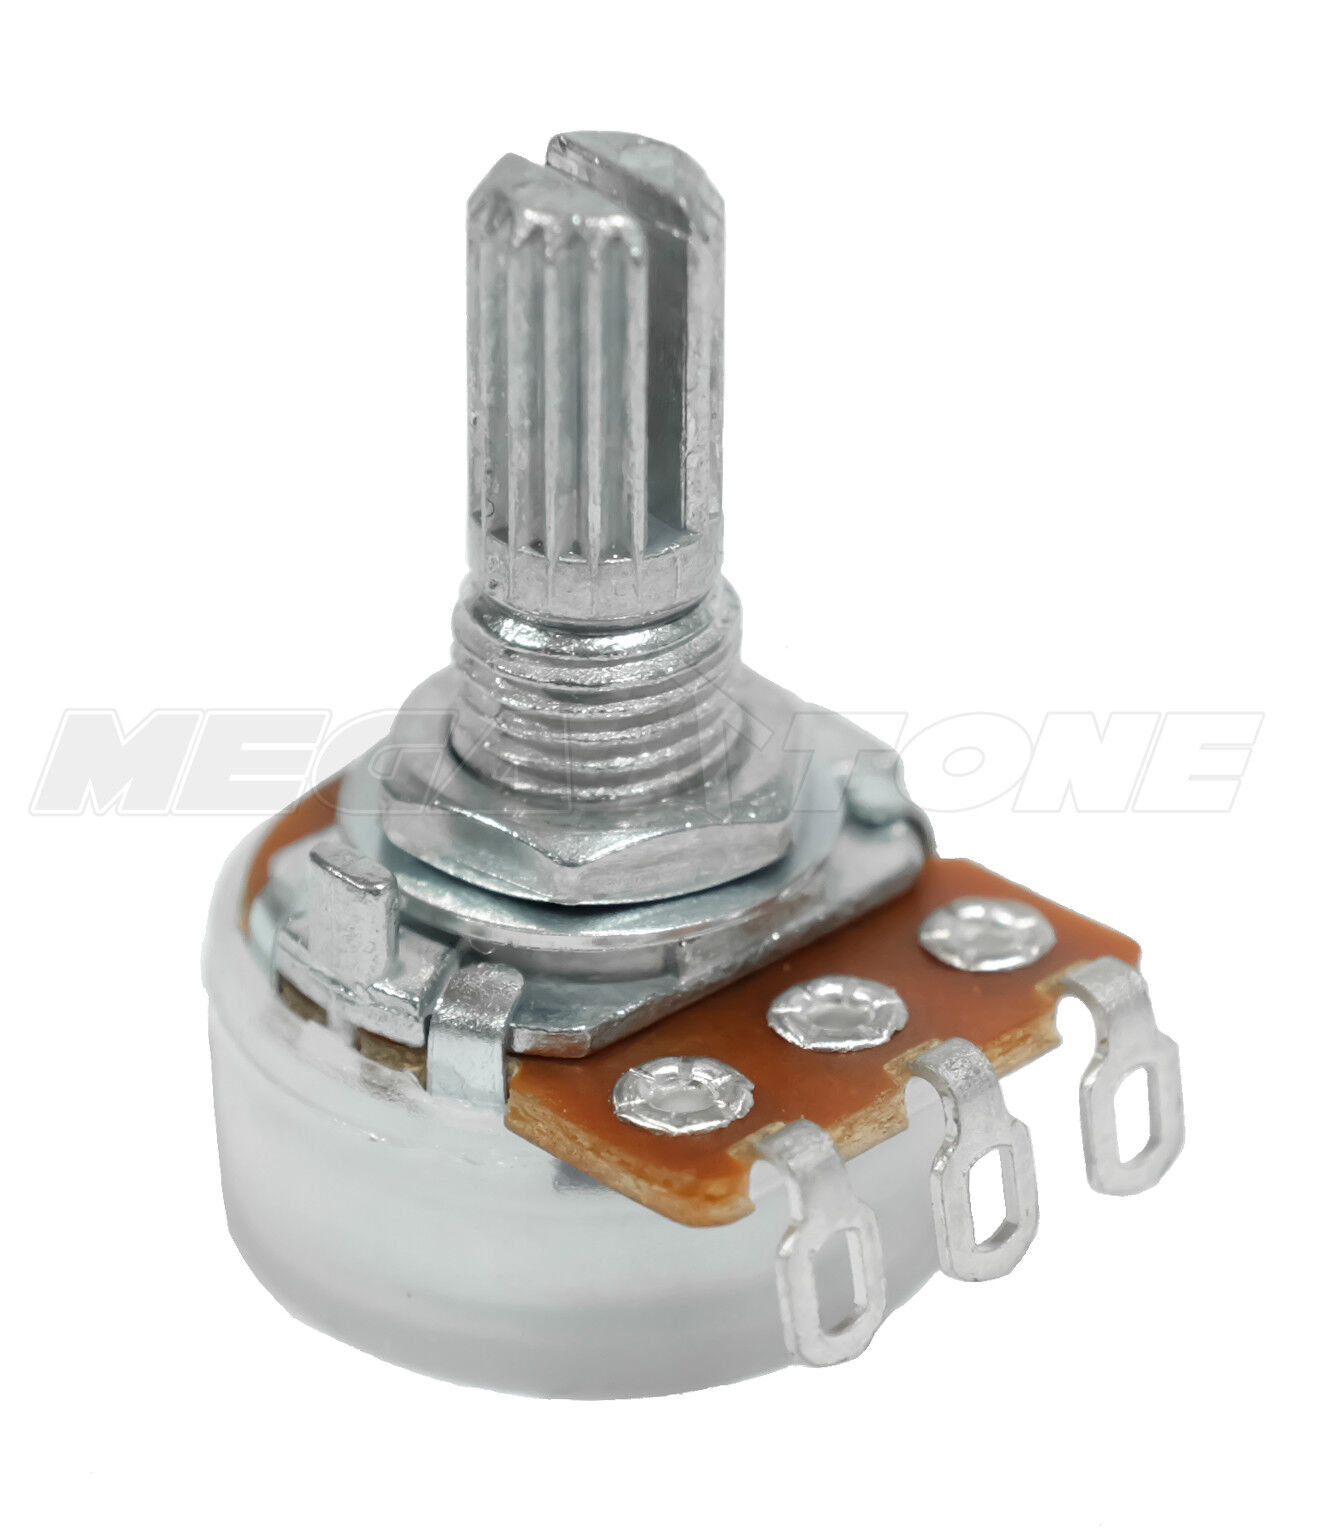 A100K Ohm Audio Potentiometer, Alpha Brand. Includes Dust Seal USA SELLER